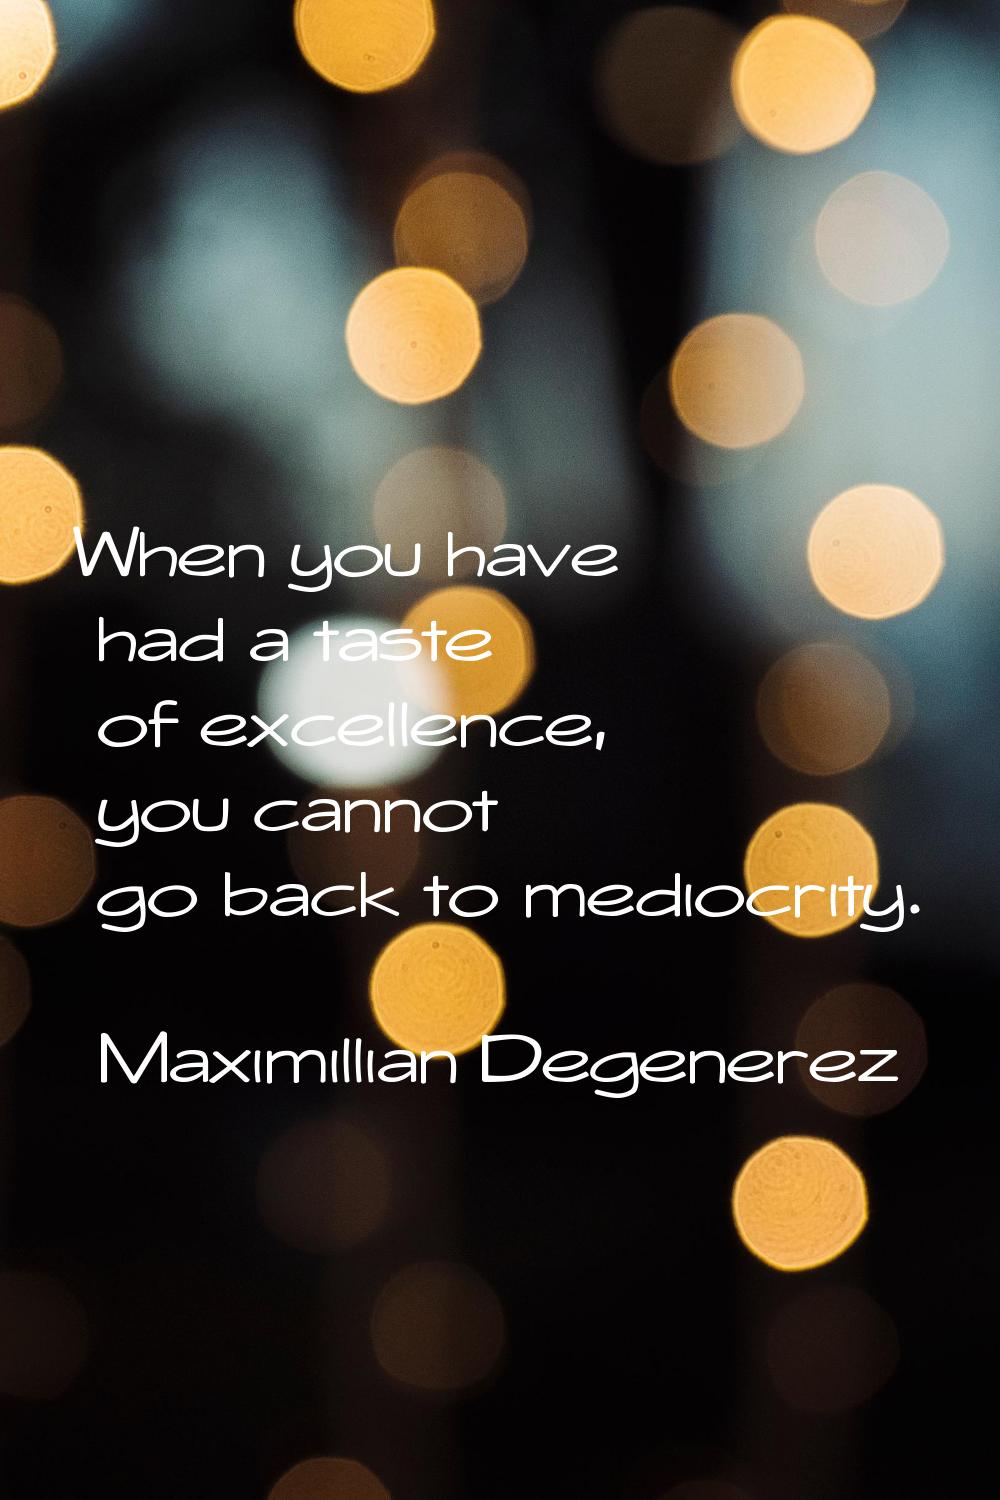 When you have had a taste of excellence, you cannot go back to mediocrity.